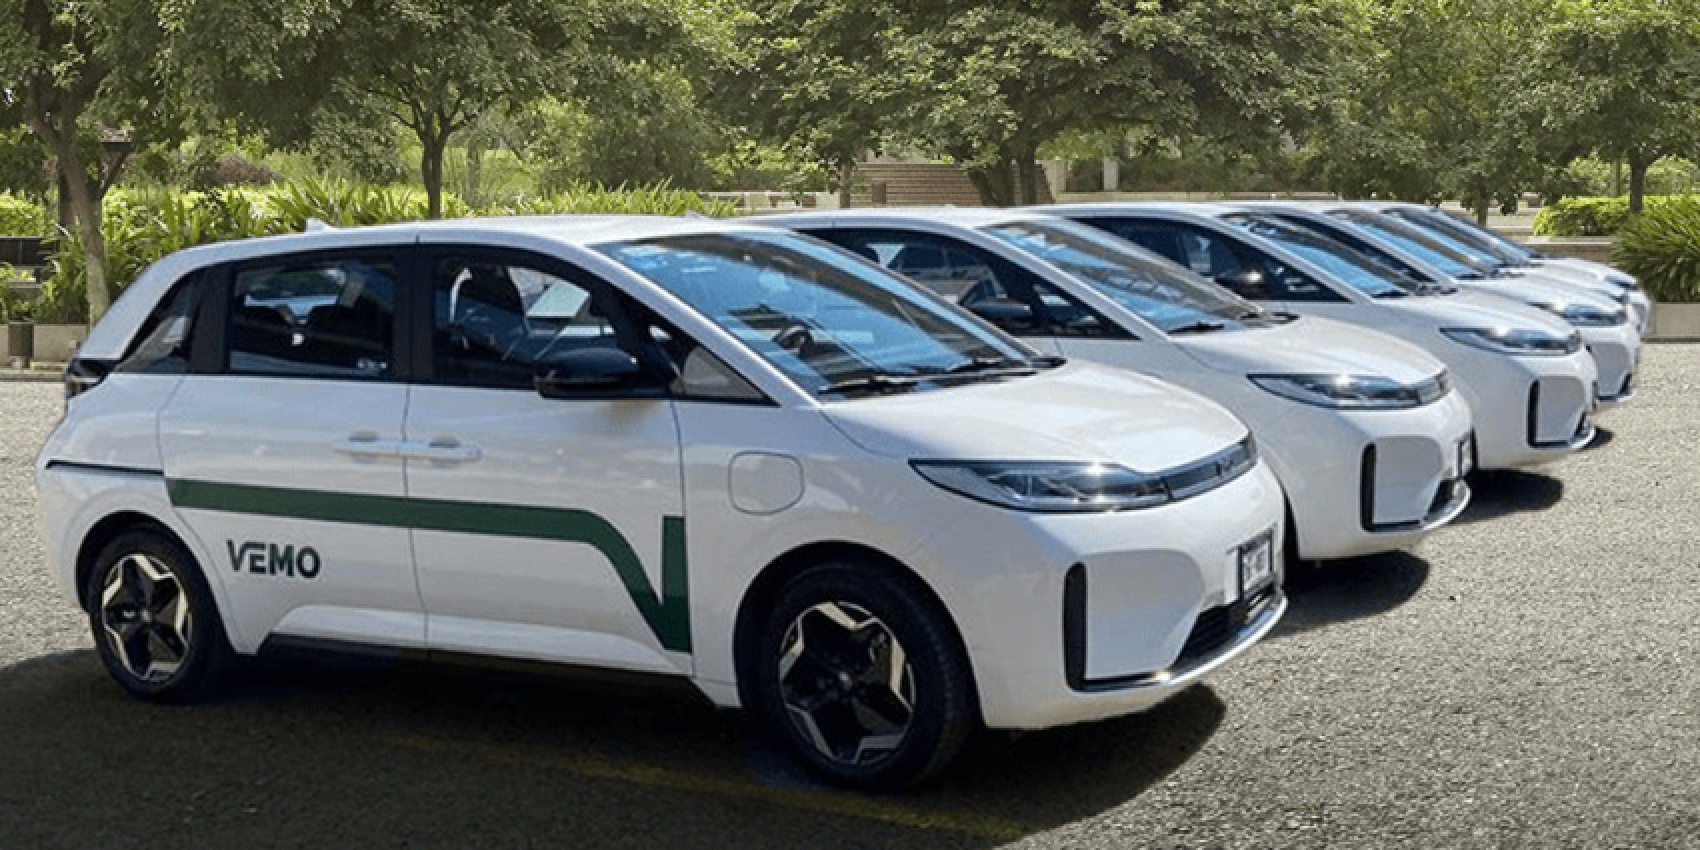 autos, byd, cars, electric vehicle, fleets, byd d1, fleet-as-a-service, mexico, mexico city, uber, vemo, vnex, vemo orders 1,000 e-cars from byd in mexico